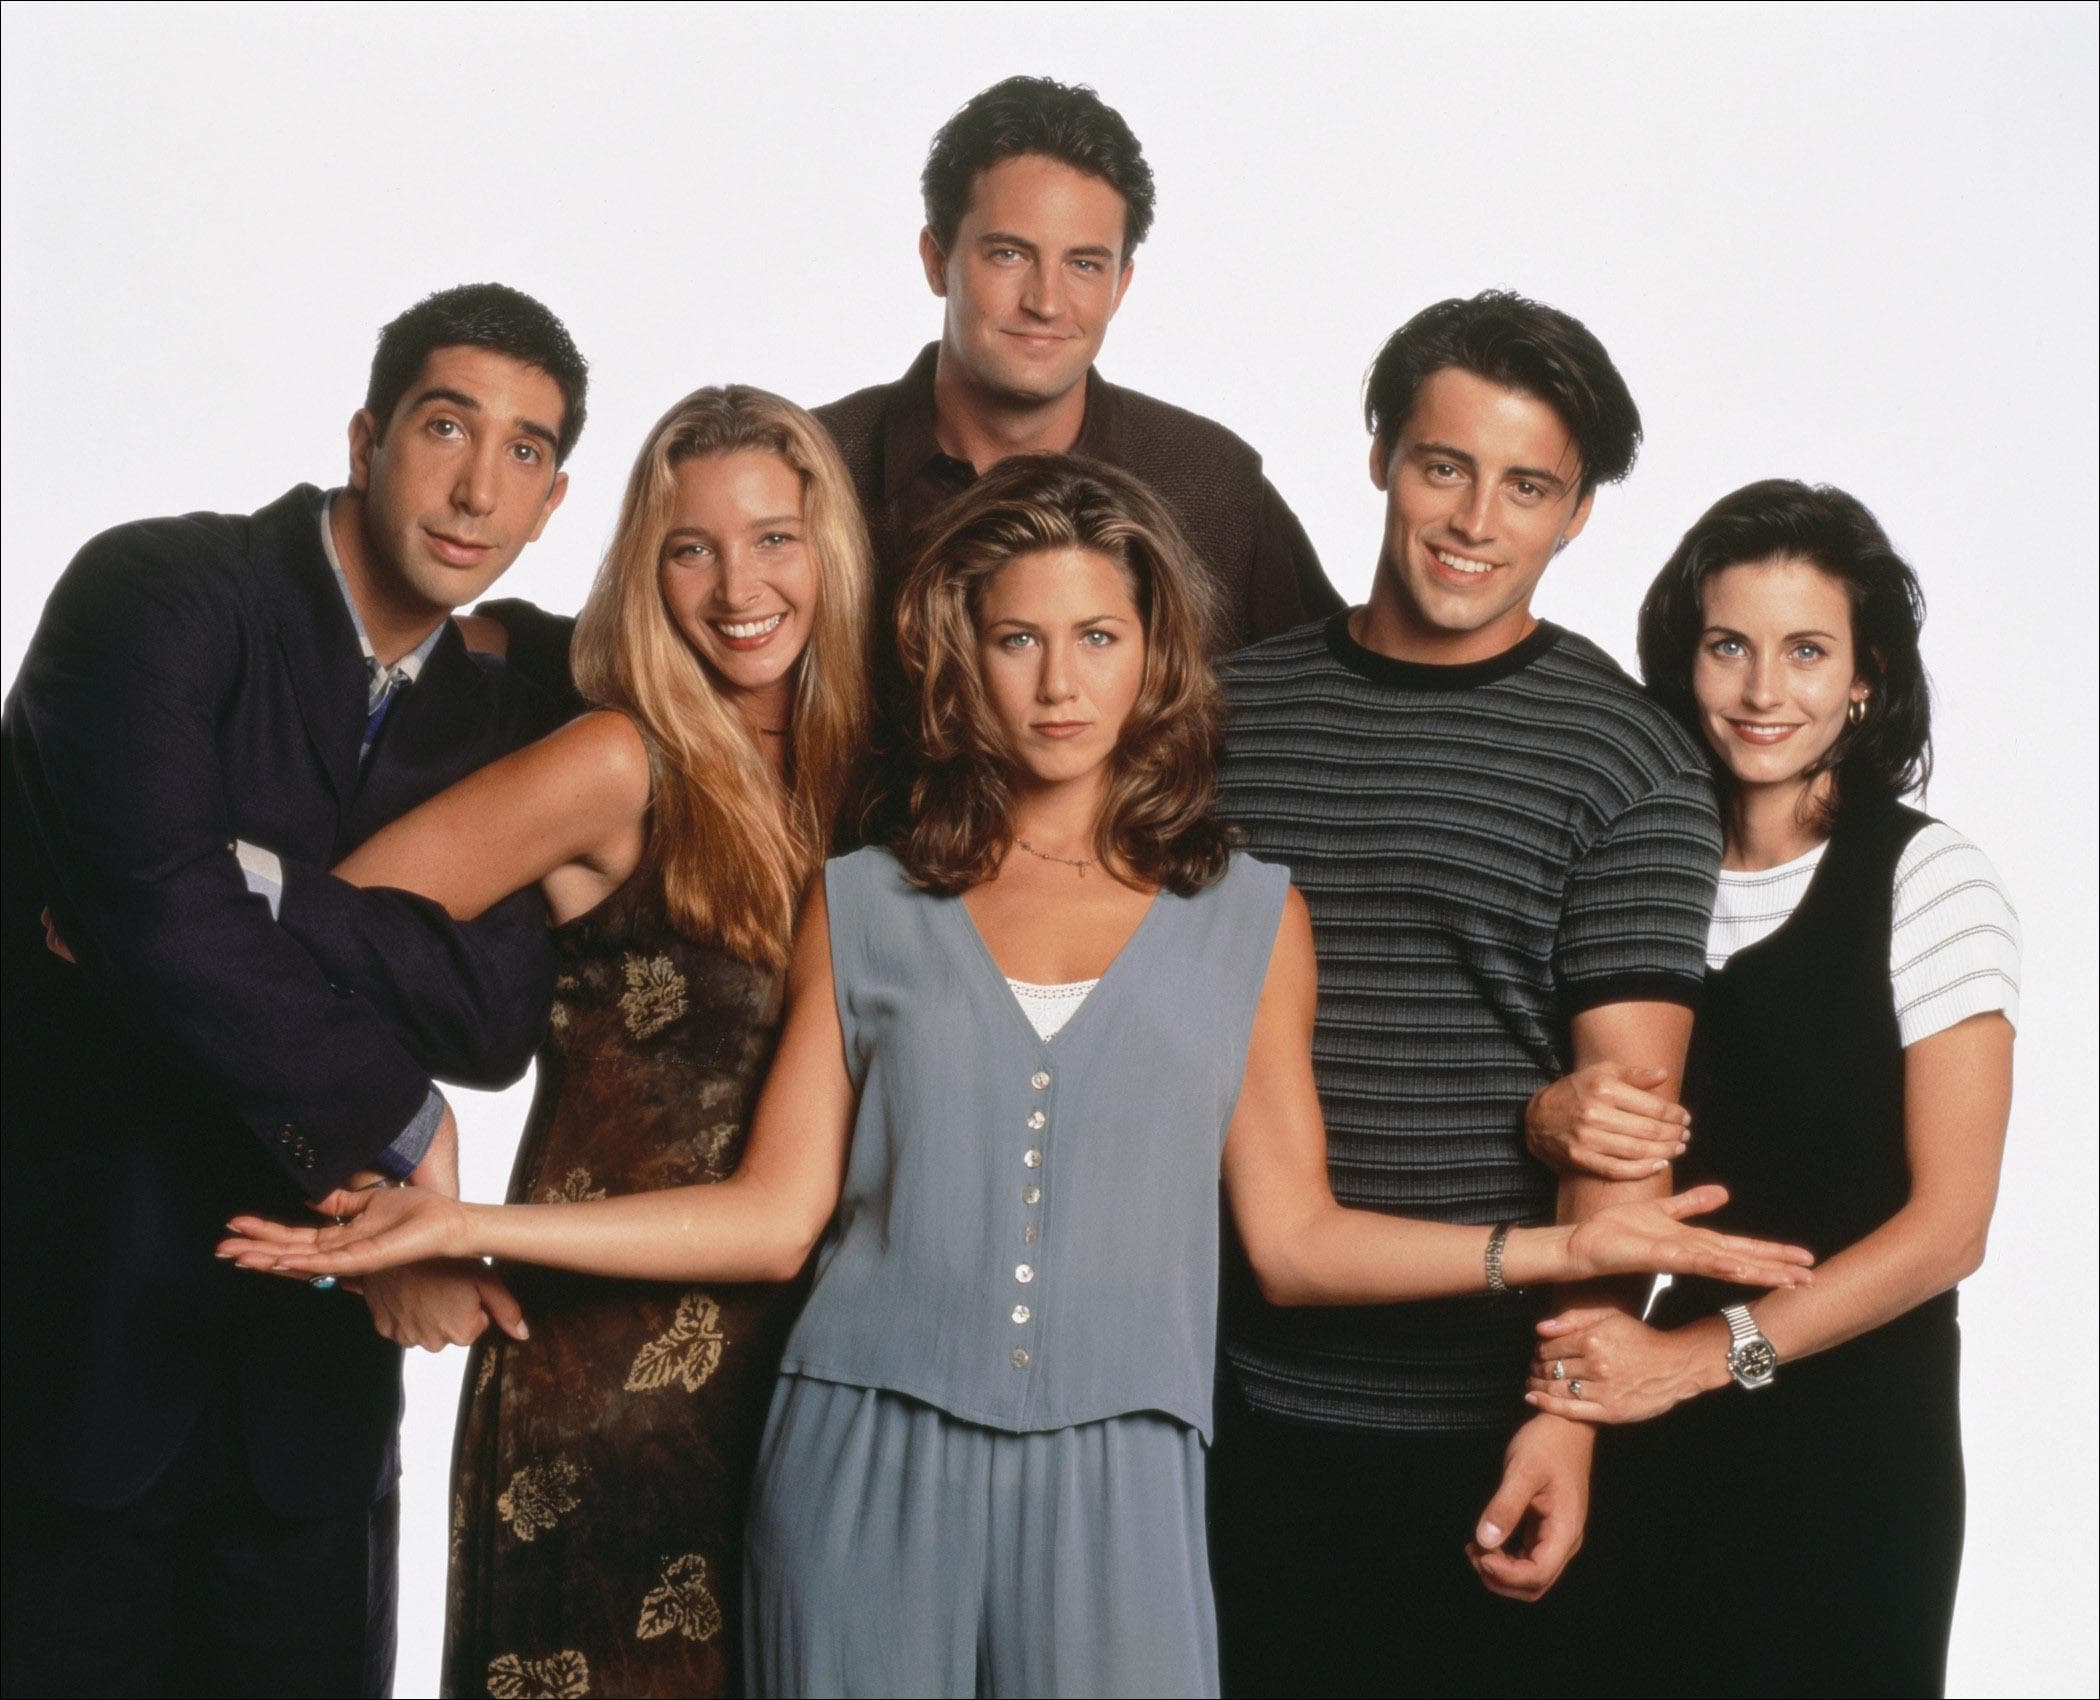 Random Things You Didn't Know About 'Friends'